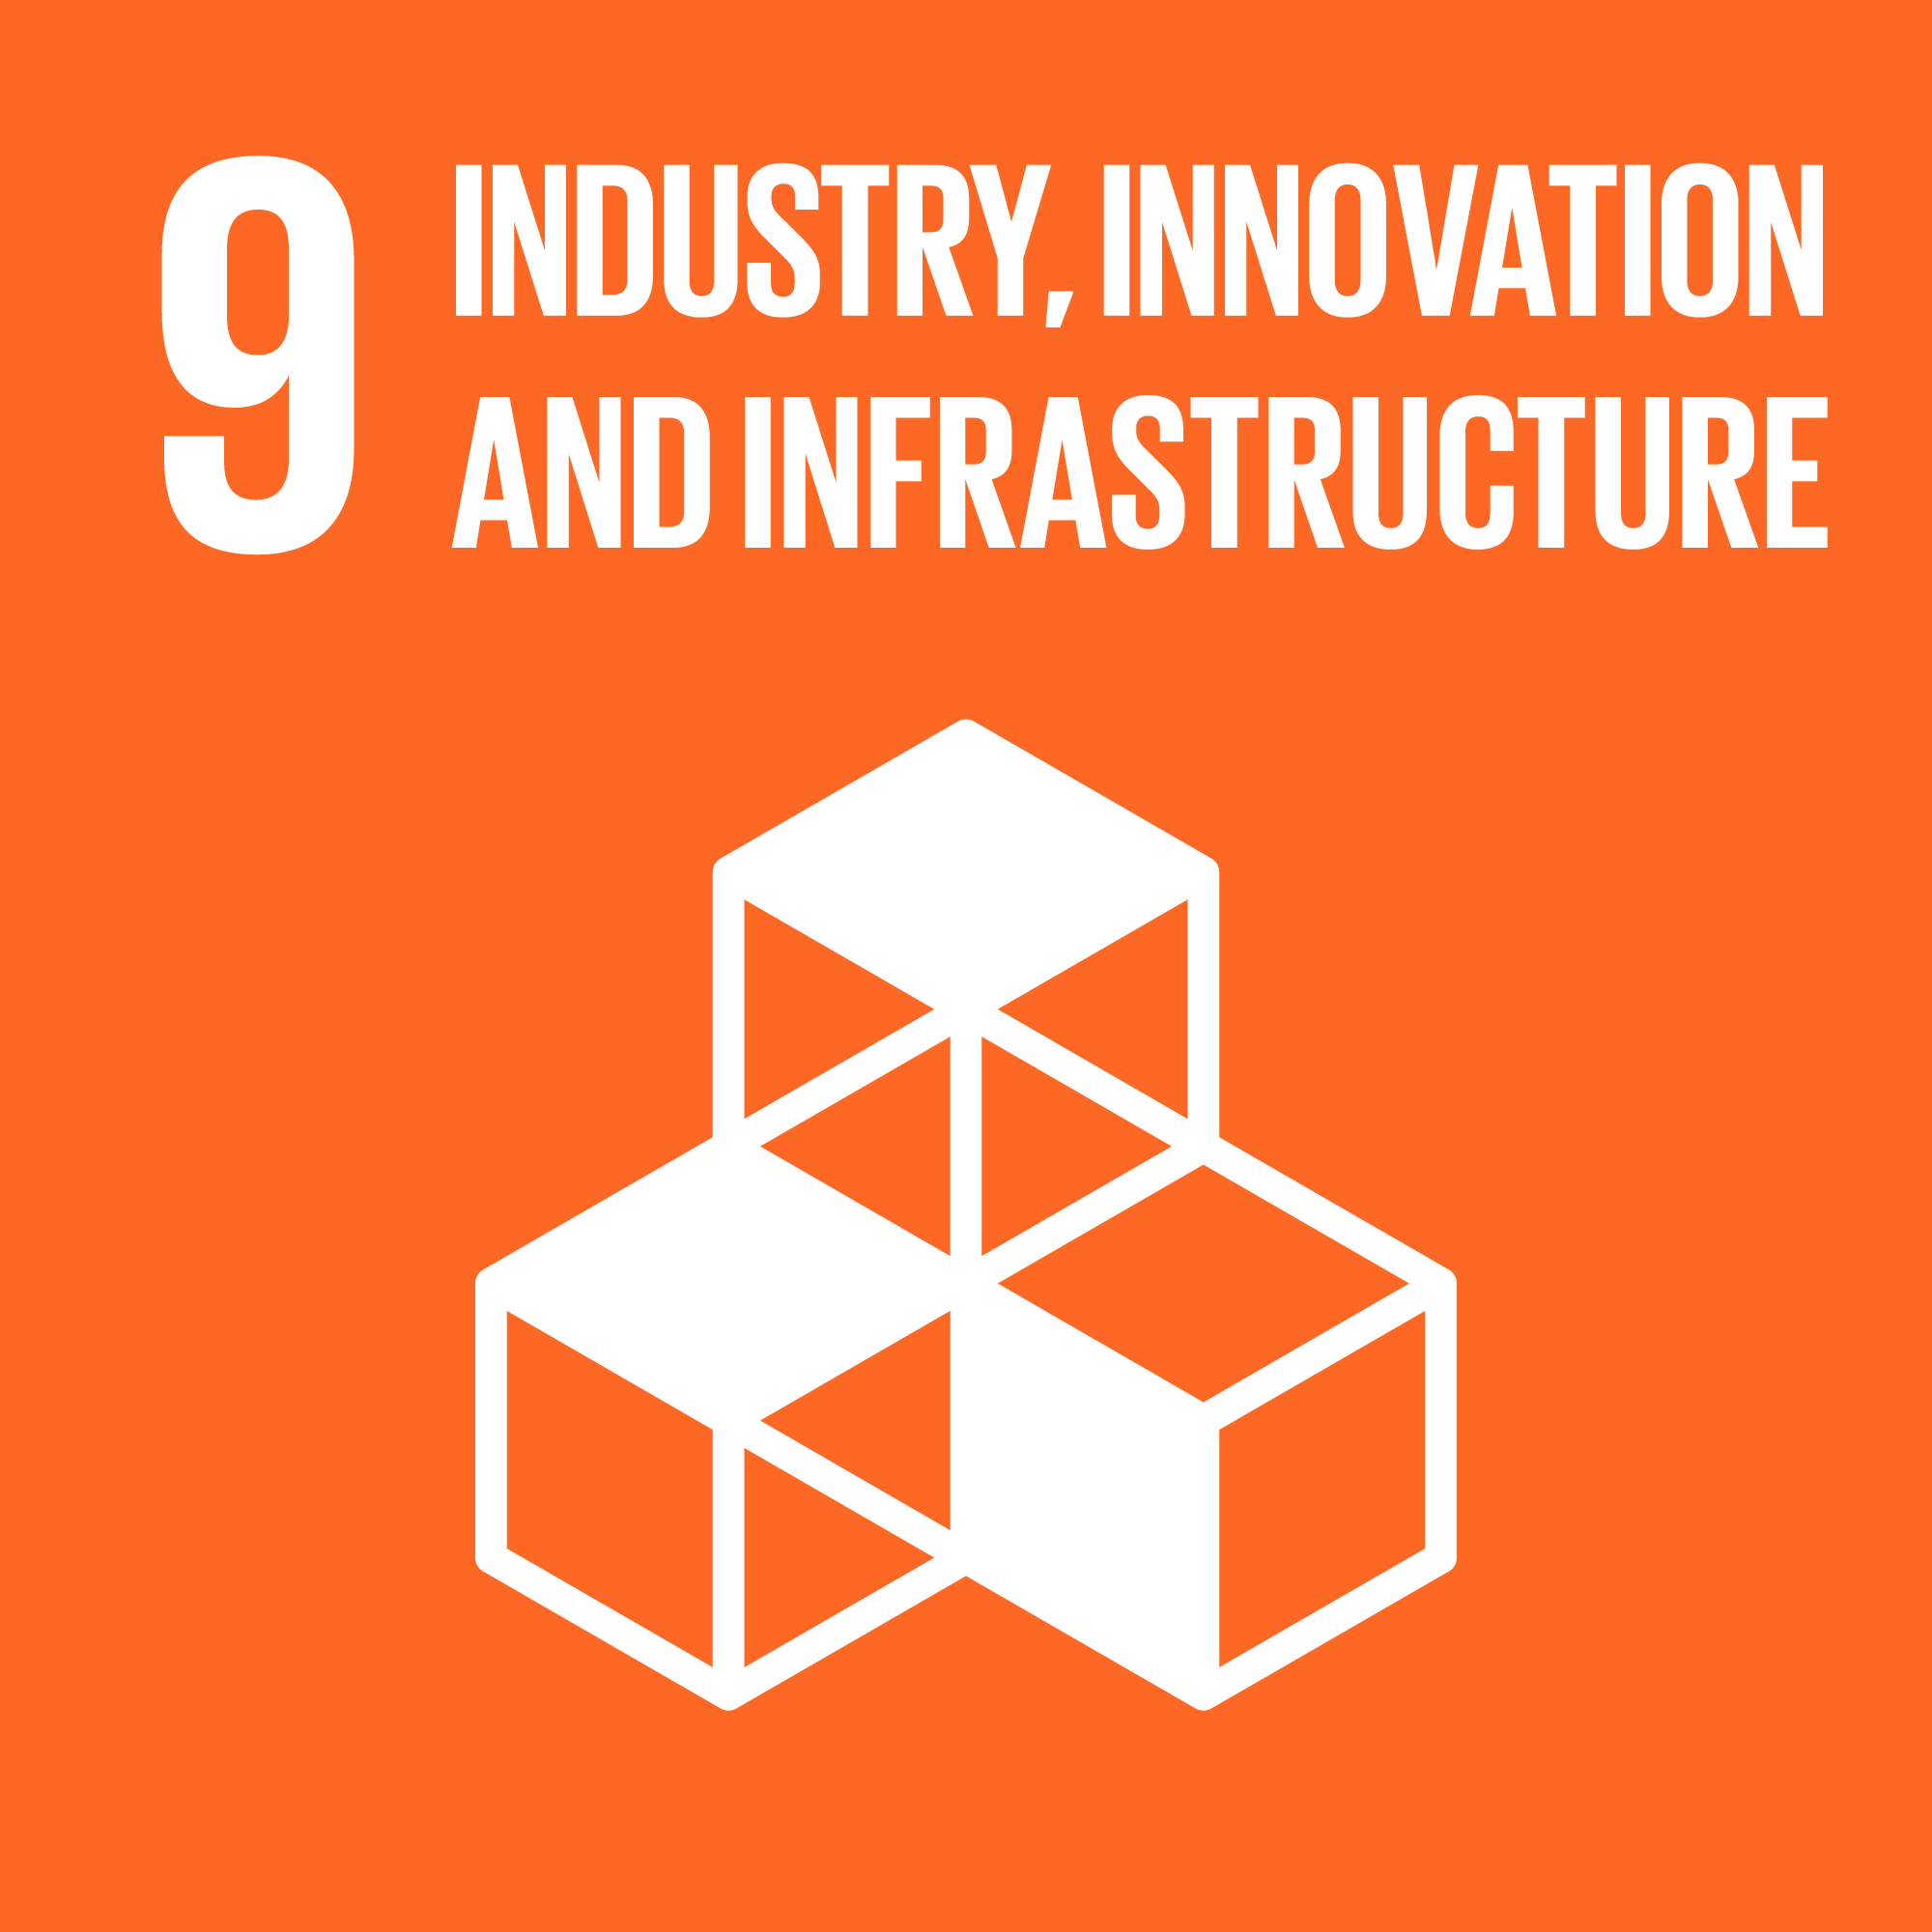  Goal 9: Industry, Innovation and Infrastructure - Build resilient infrastructure, promote inclusive and sustainable industrialization and foster innovation